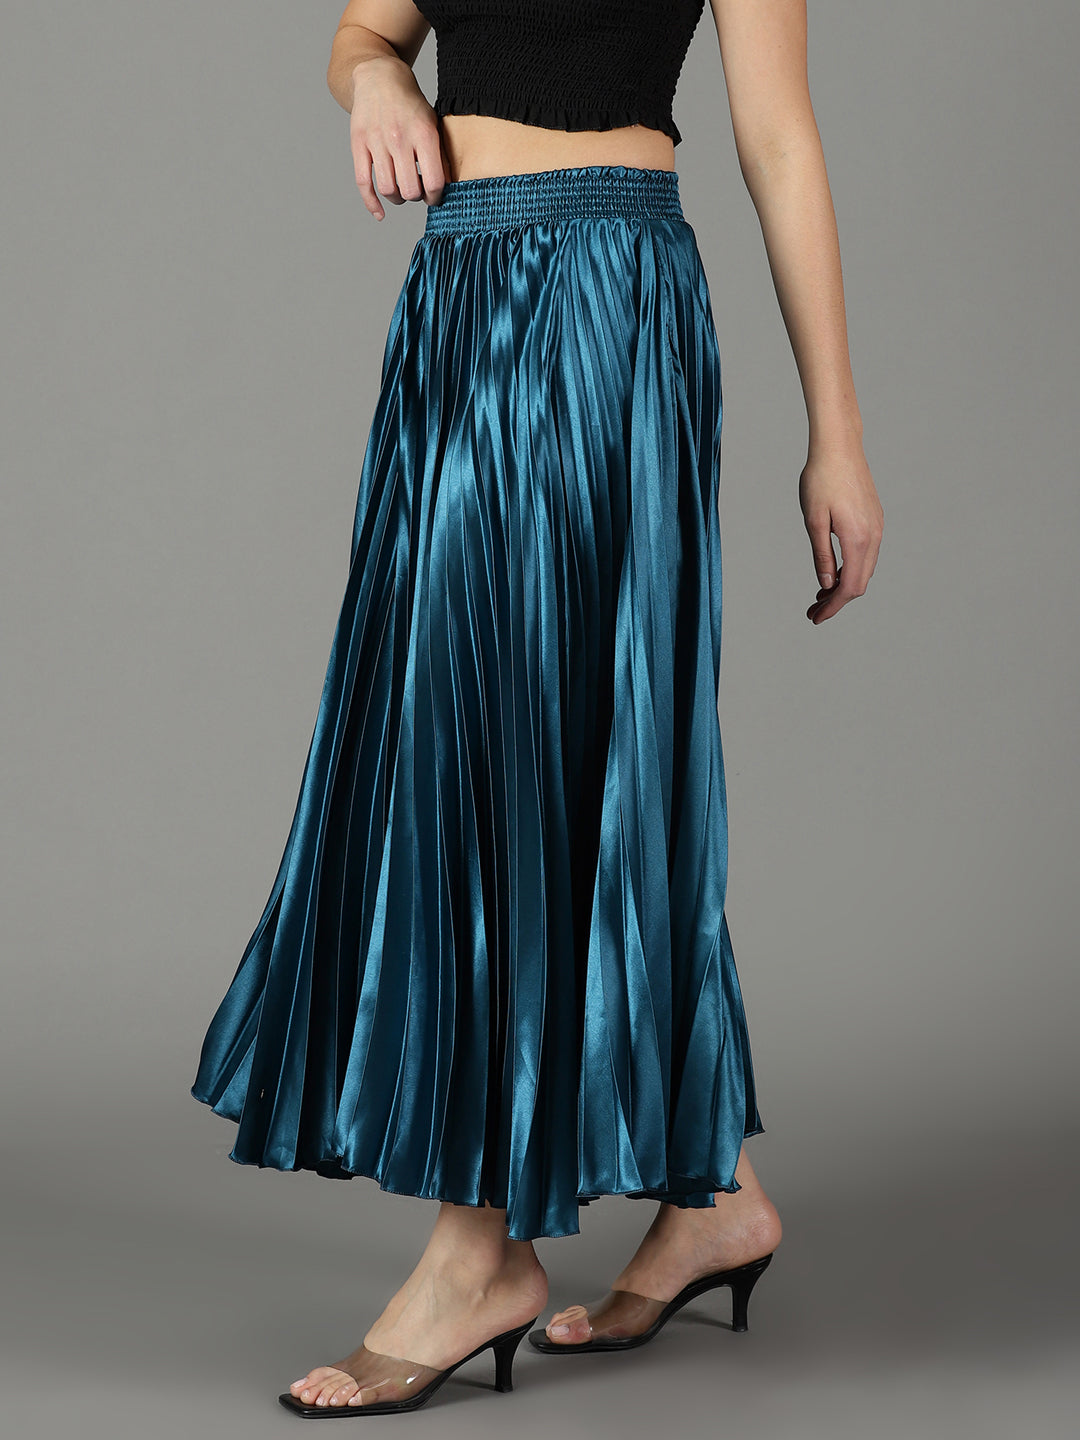 Women's Teal Solid Flared Skirt